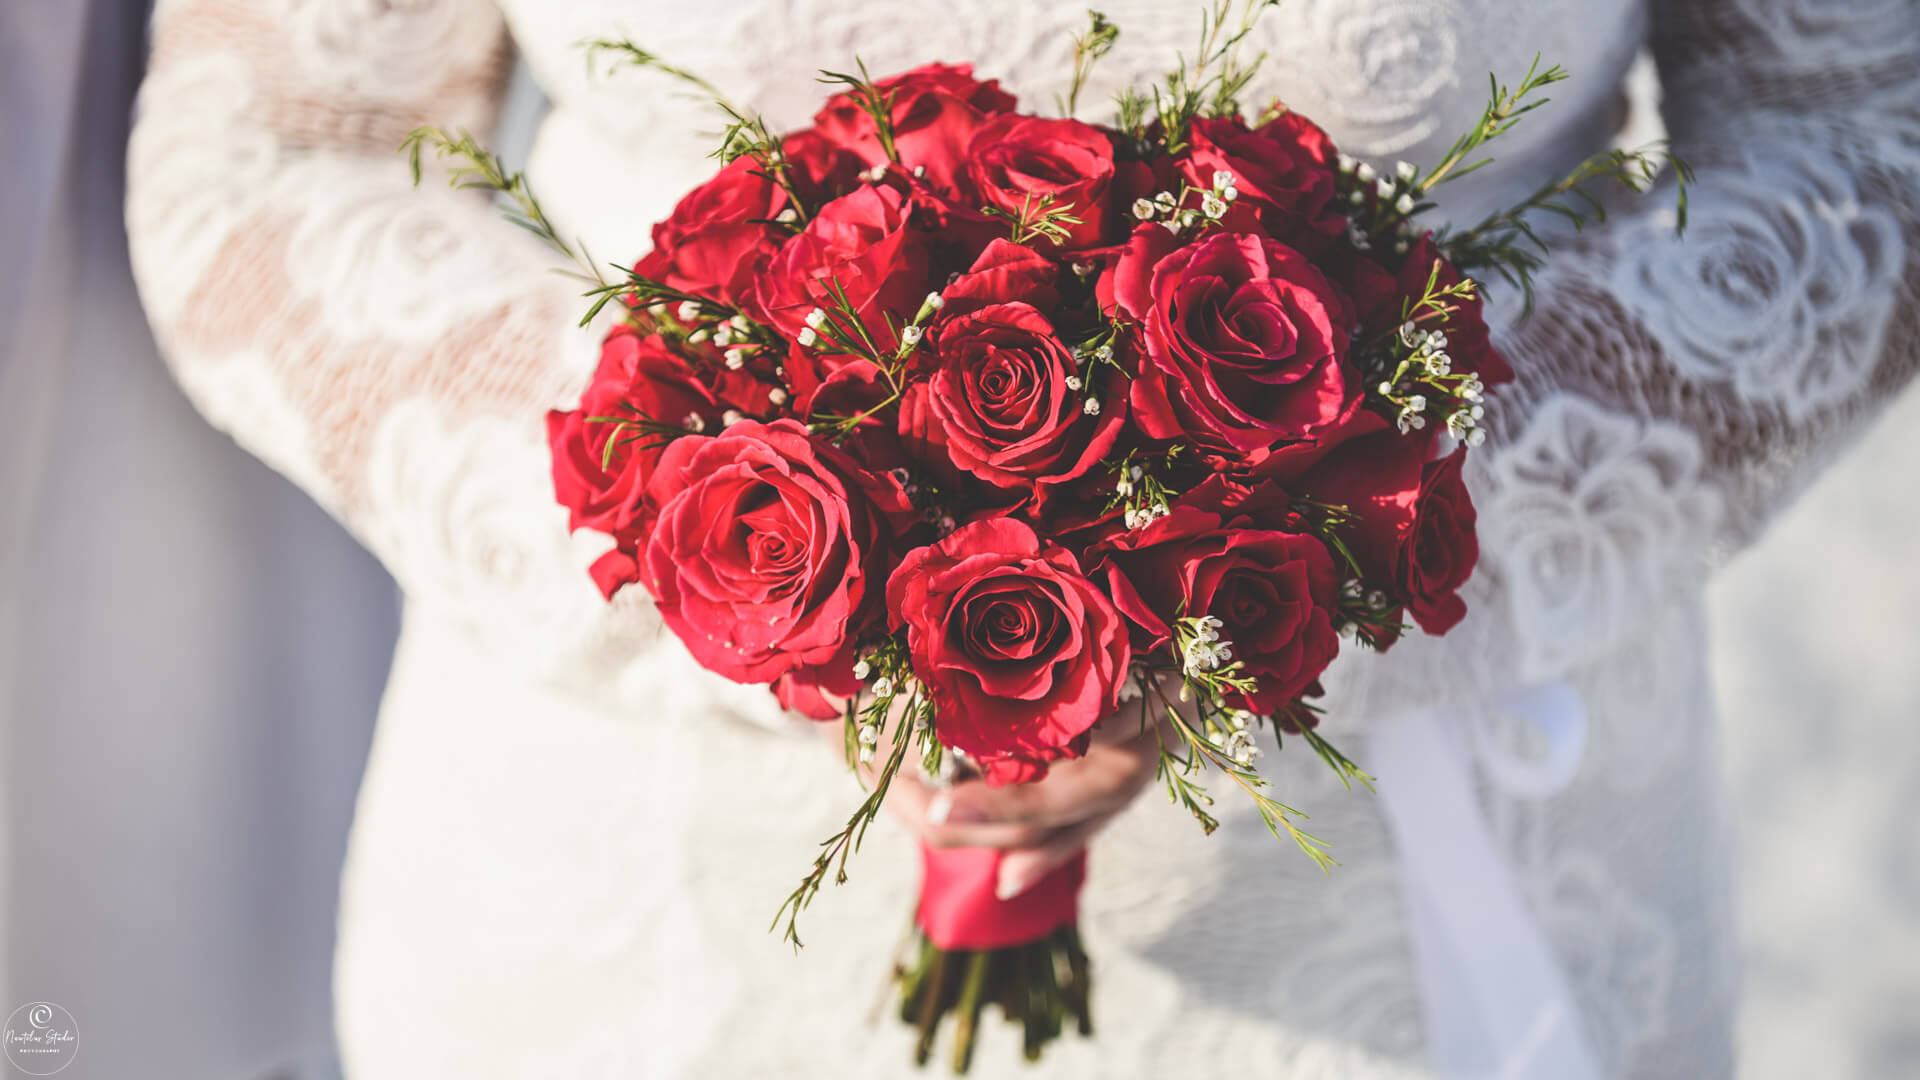 Photo of red rose bridal bouquet at a elopement wedding